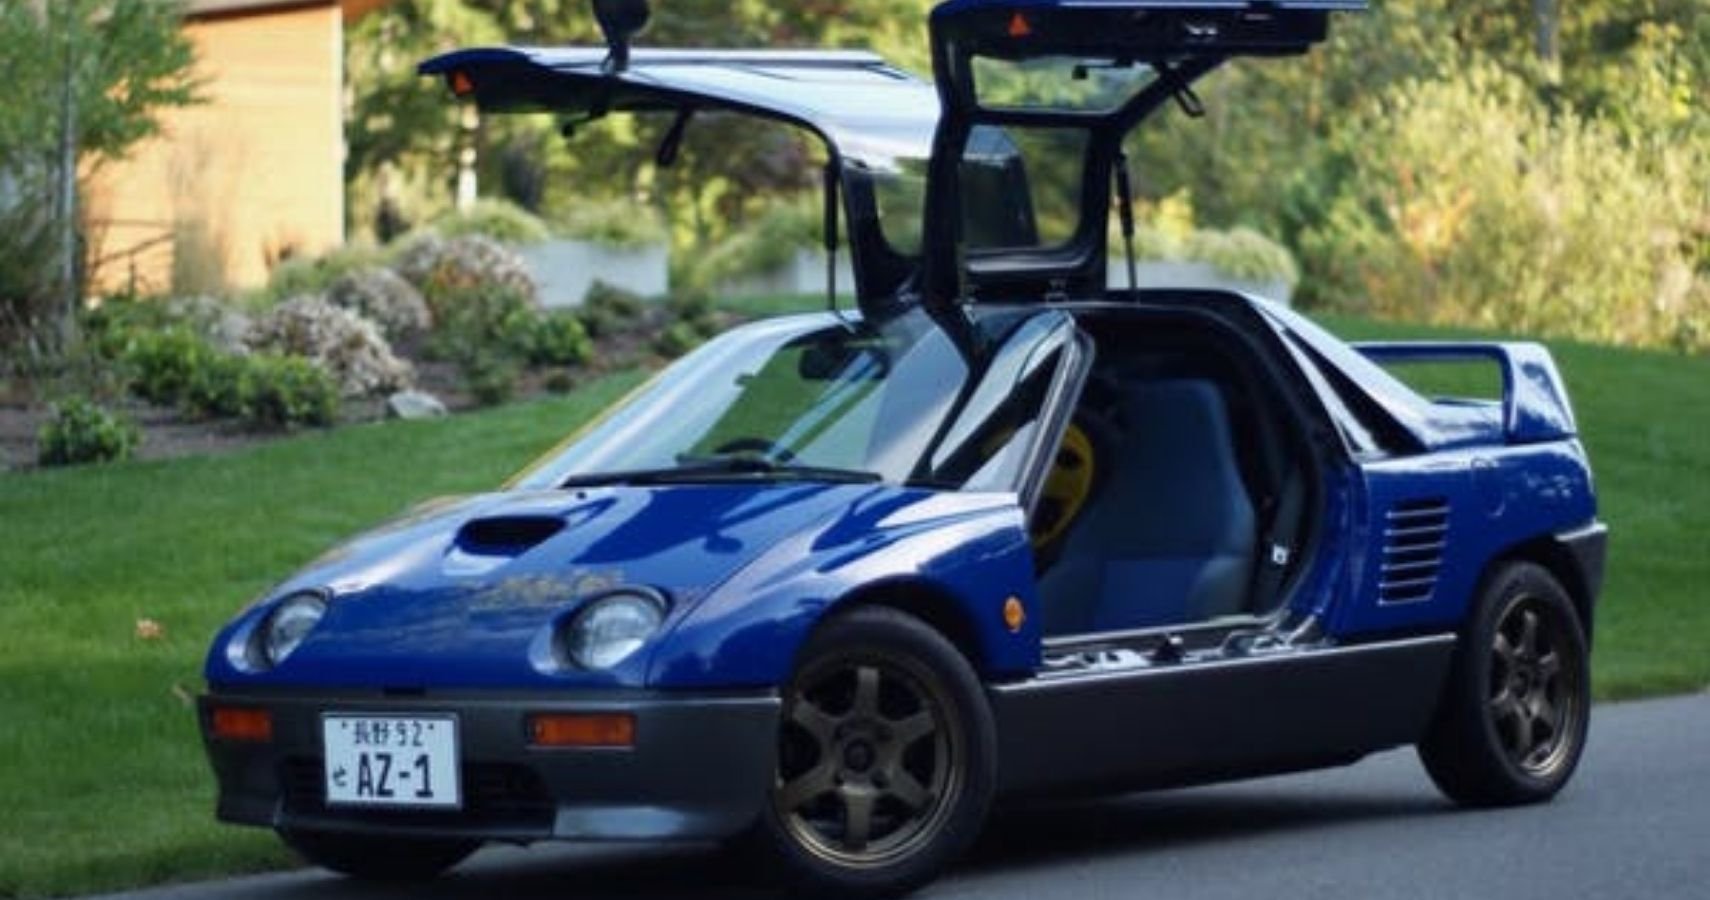 What To Know Before Buying An Autozam AZ-1